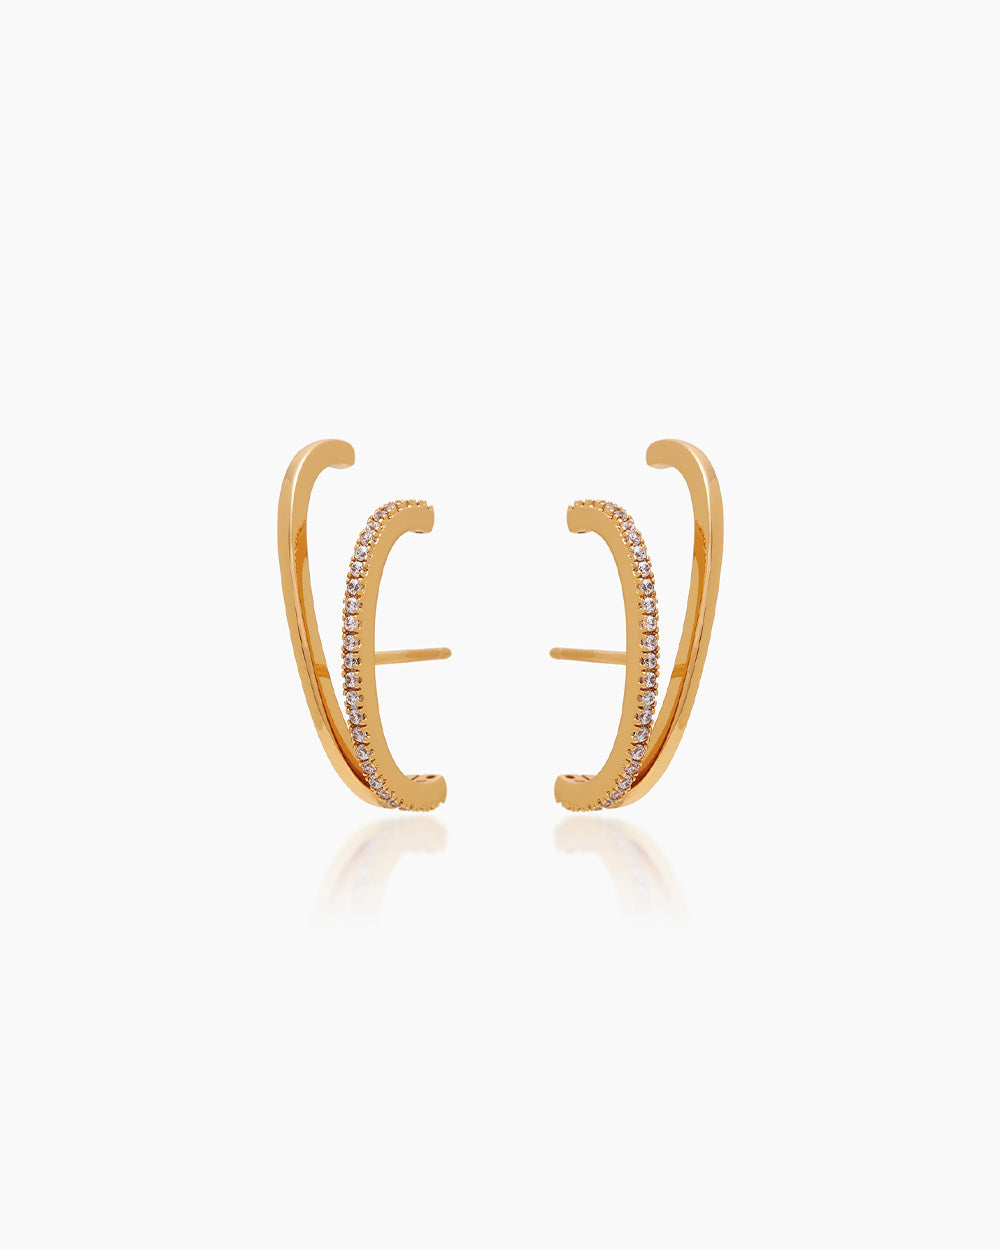 The Vanessa Huggies, double stacked illusion earrings that offer a modern suspender style